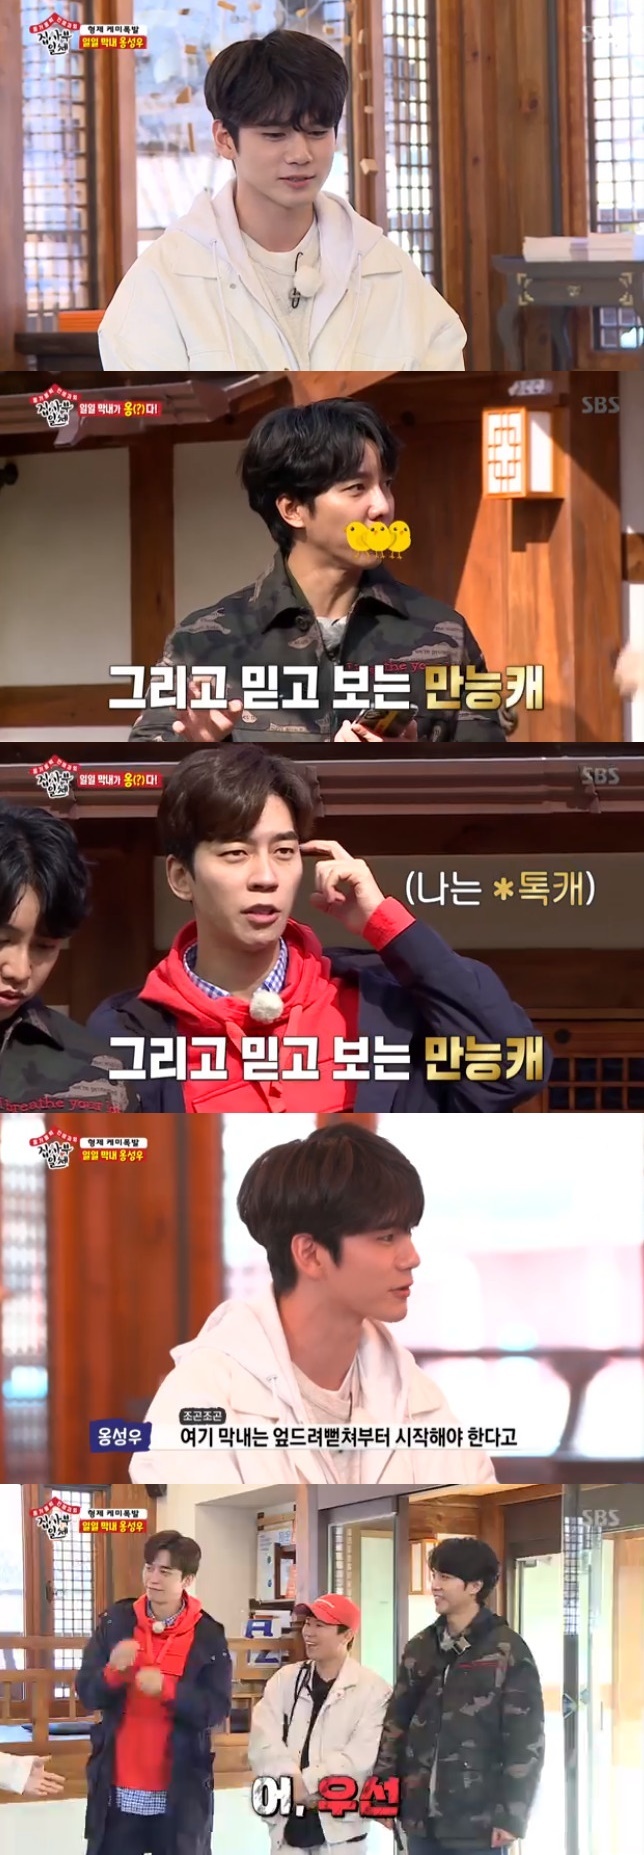 Seoul = = Ong Seong-wu appeared as a daily student.Shin Sung-rok Lee Seung-gi Yang Se-hyeong and daily student Ong Seong-wu spent a day with the master of the Samulnori Legend on SBS All The Butlers broadcast on the afternoon of the 22nd.The members felt the vacancy of Yang Sung-jae and Lee Sang-yoon, saying, I feel strange because three people go. Lee Seung-gi said, I seem to be teeing.Now, there is only new type left in new rising type, and  Lets change to new century. Yang Se-hyeong said, Lee Seung-gi was the youngest in my career, and after about 15 years, Lee Seung-gi is the youngest. He said, You may be the youngest to broadcast when you are 60 to 70 years old.Prior to the appearance of the daily student Ong Seong-wu, Lee Seung-gi said, I noticed that this Friend came in.I personally wondered about Friend, and Shin Sung-rok said, Personally, I really like this Friend. I wanted to meet it because I felt like it. Ong Seong-wu, who was waiting for his brothers, took off his face mask and had his first meeting.After hugging his brothers, he asked, Do you want to start with the youngest one lying down?Ong Seong-wu remembered Lee Seung-gi serving him a warm tea a year ago during the All The Butlers Challenge, and handed him the prepared tea.When Yang Se-hyeong says, Lets not get too fast, but slowly get close, Ong Seong-wu looks at Lee Seung-gi Shin Sung-rok and says, Can my brothers get close?I was seen with the sense of Ong Seong-wu, who quickly drew the two on my side.